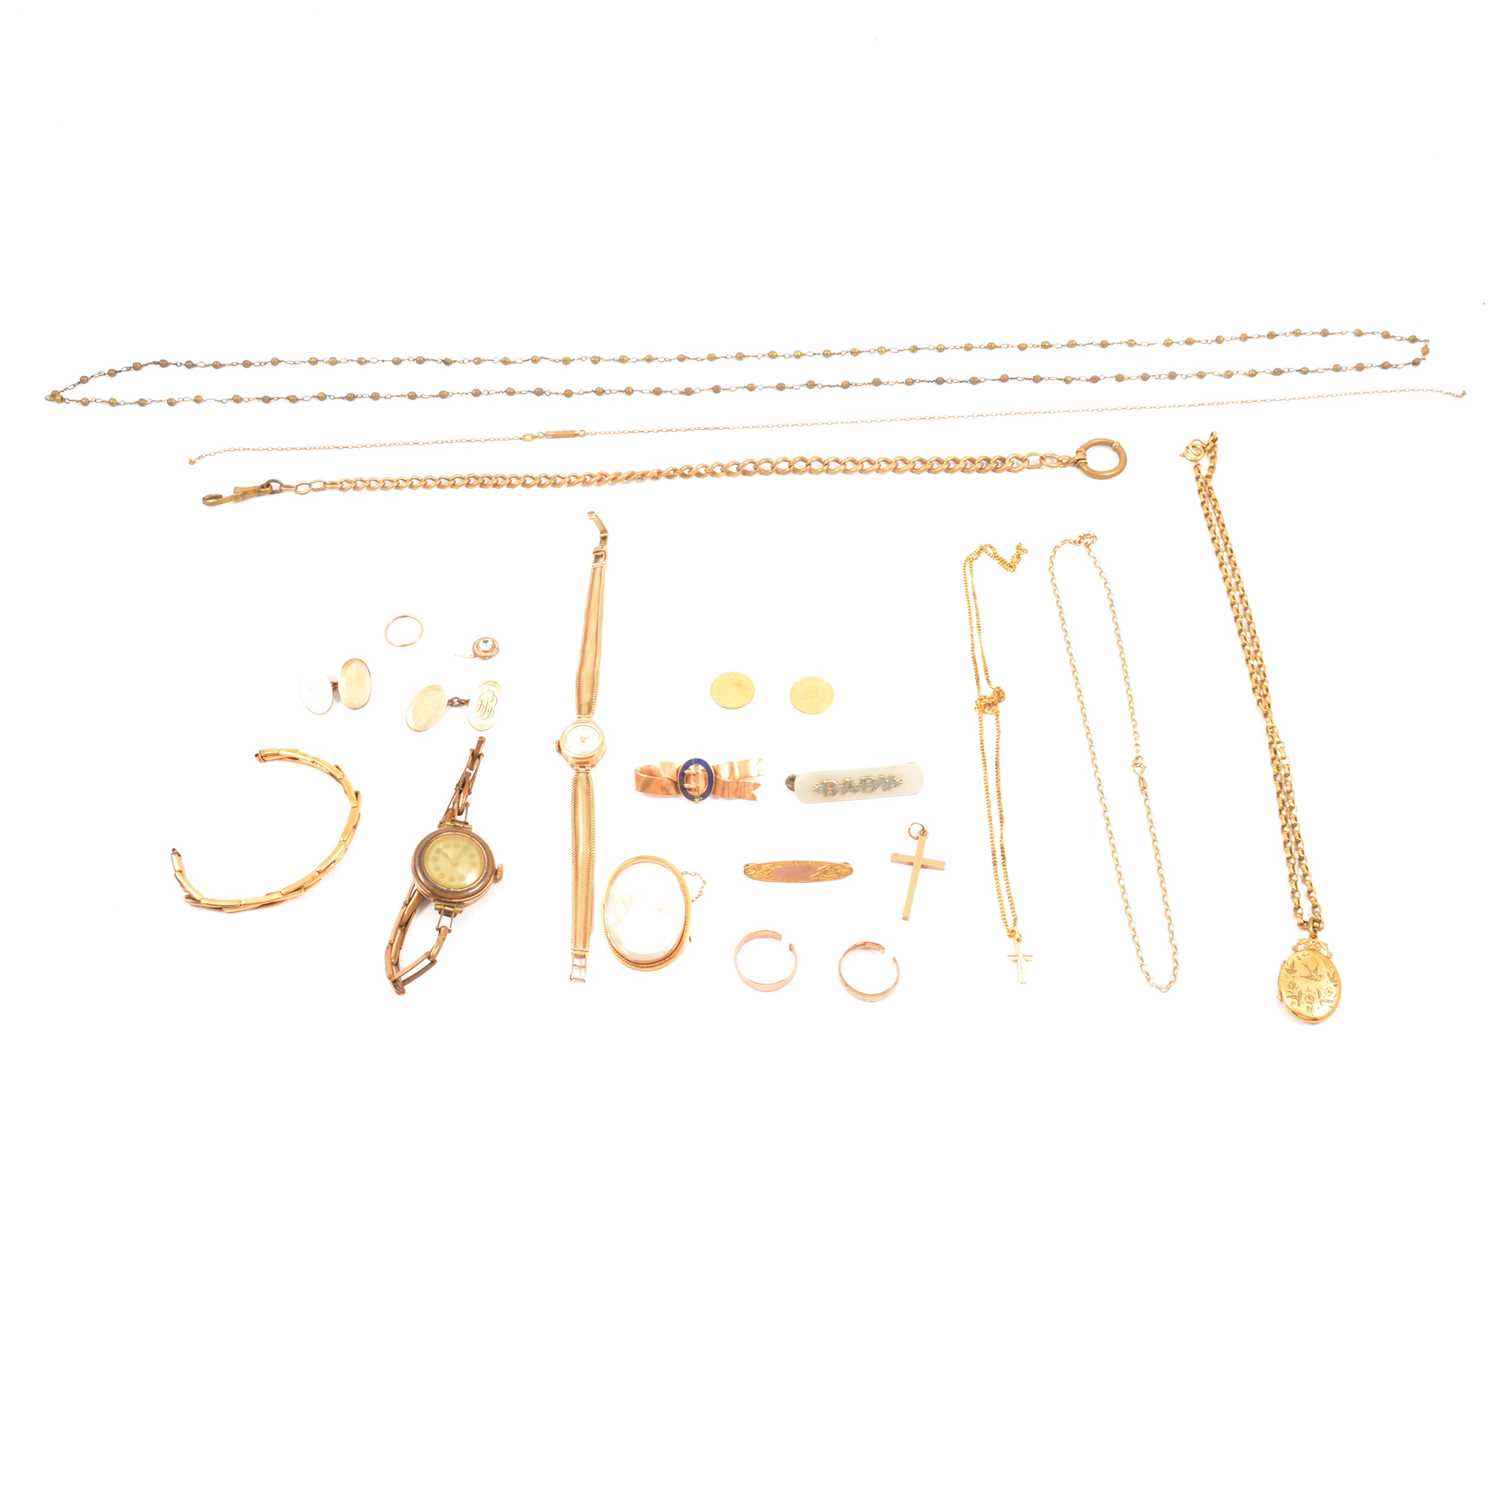 A lady’s gold wristwatch and collection of jewellery.